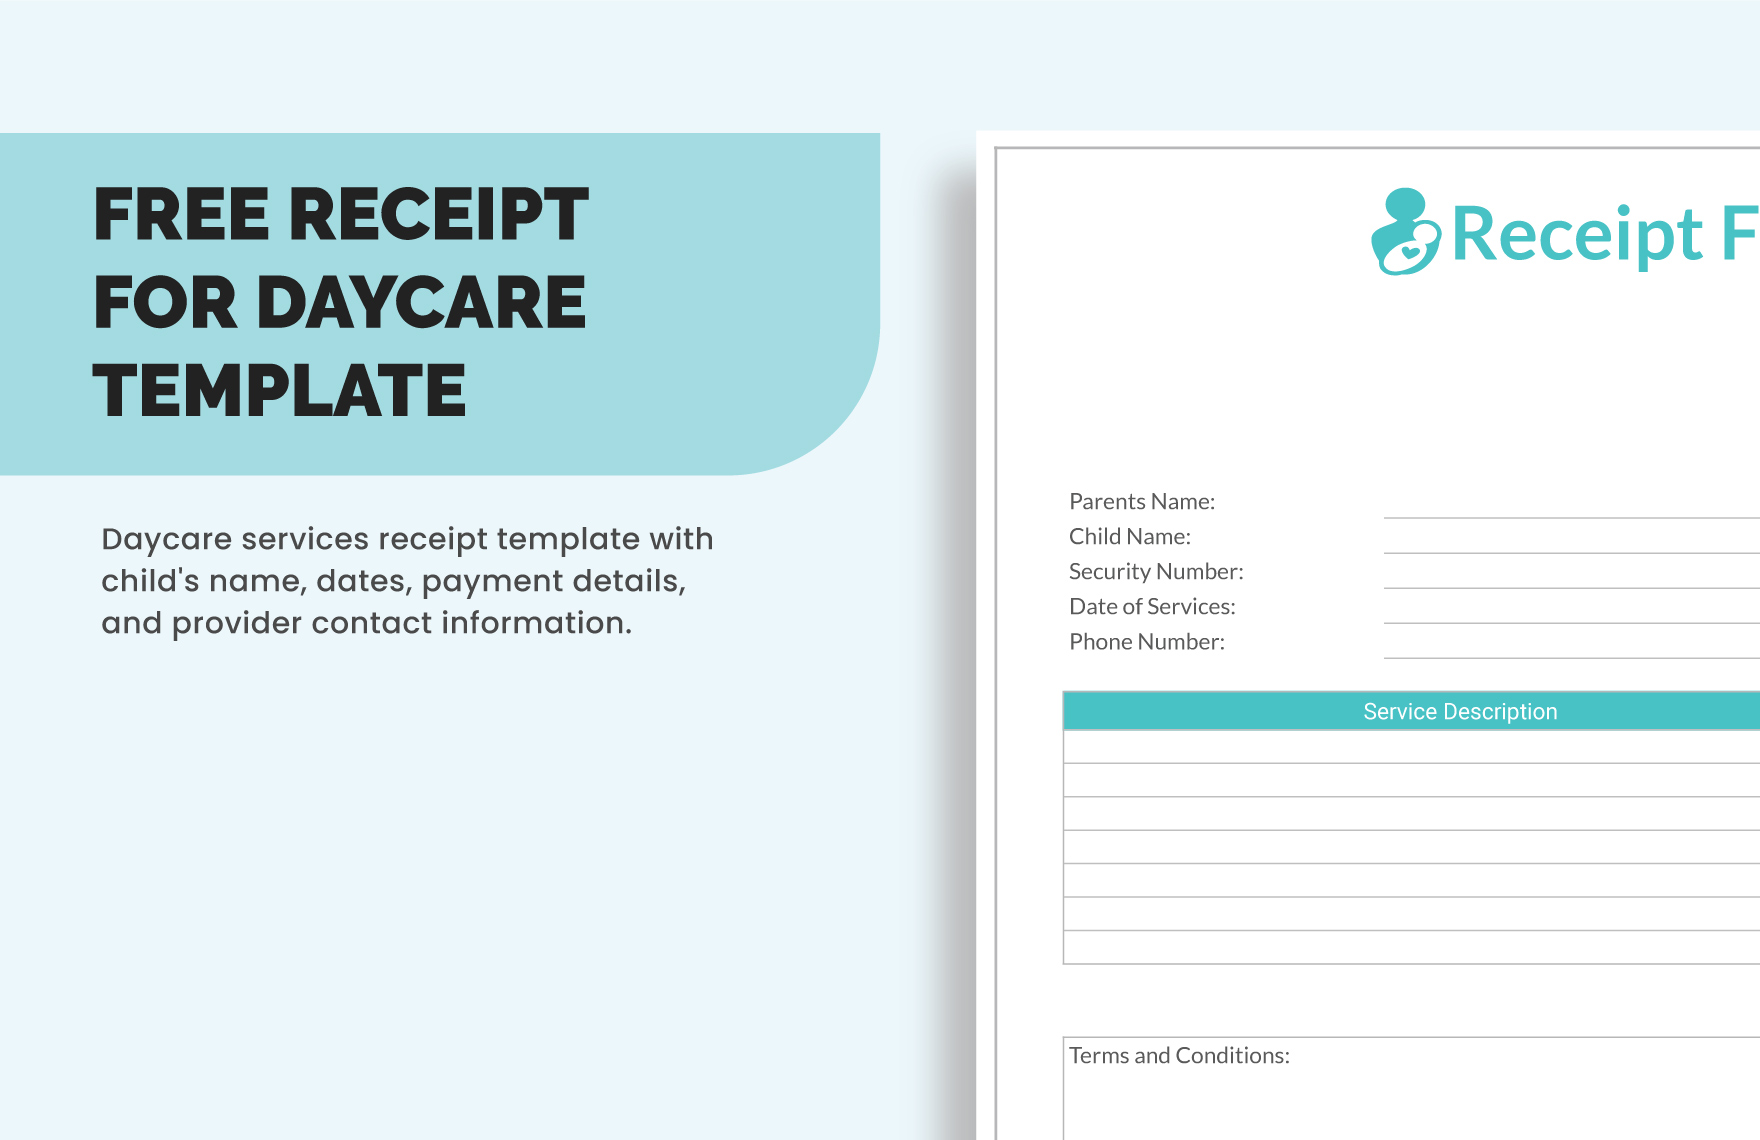 Unit Price Sales Invoice / Receipt Template 2023, Microsoft Excel, Easy  To Use